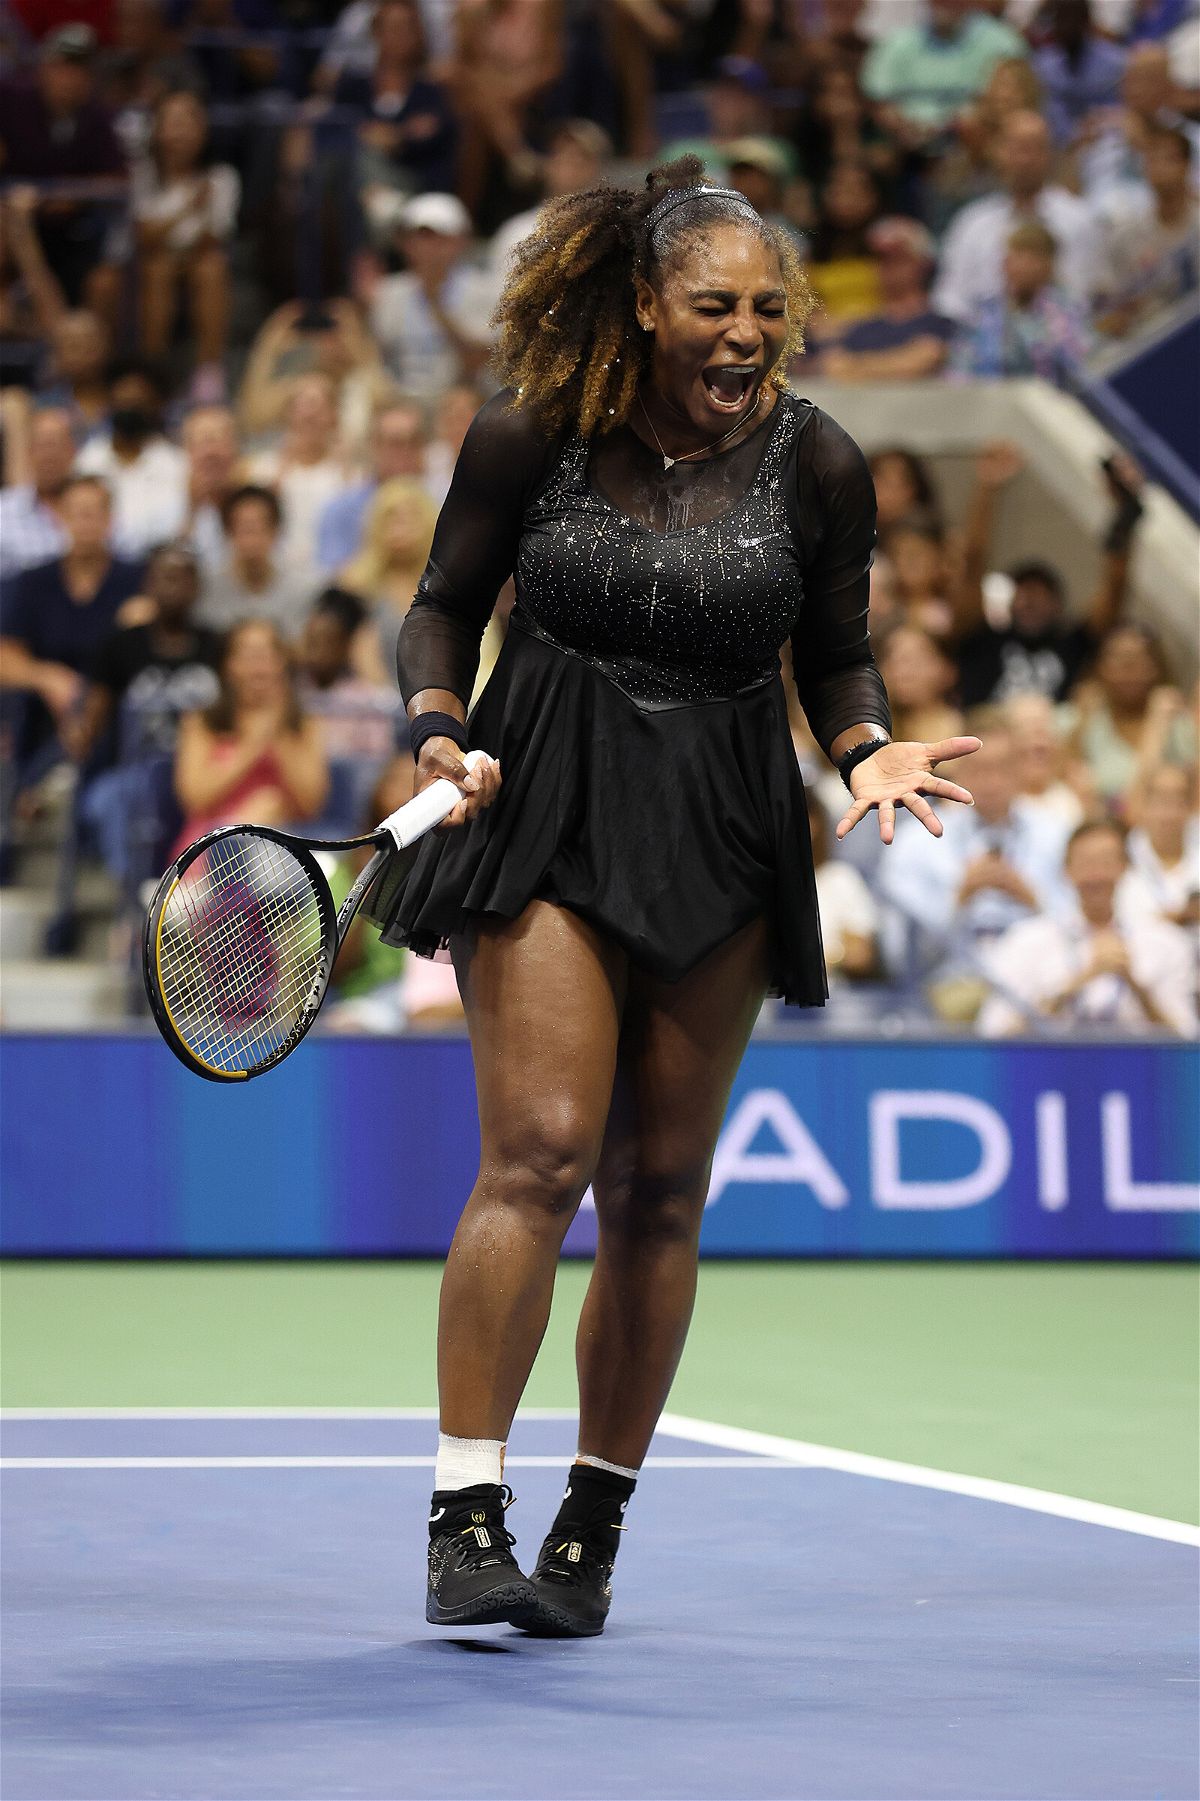 <i>Al Bello/Getty Images</i><br/>Serena Williams reacts after winning the first set against Danka Kovinić during their first round match at the 2022 US Open on August 29 in New York.